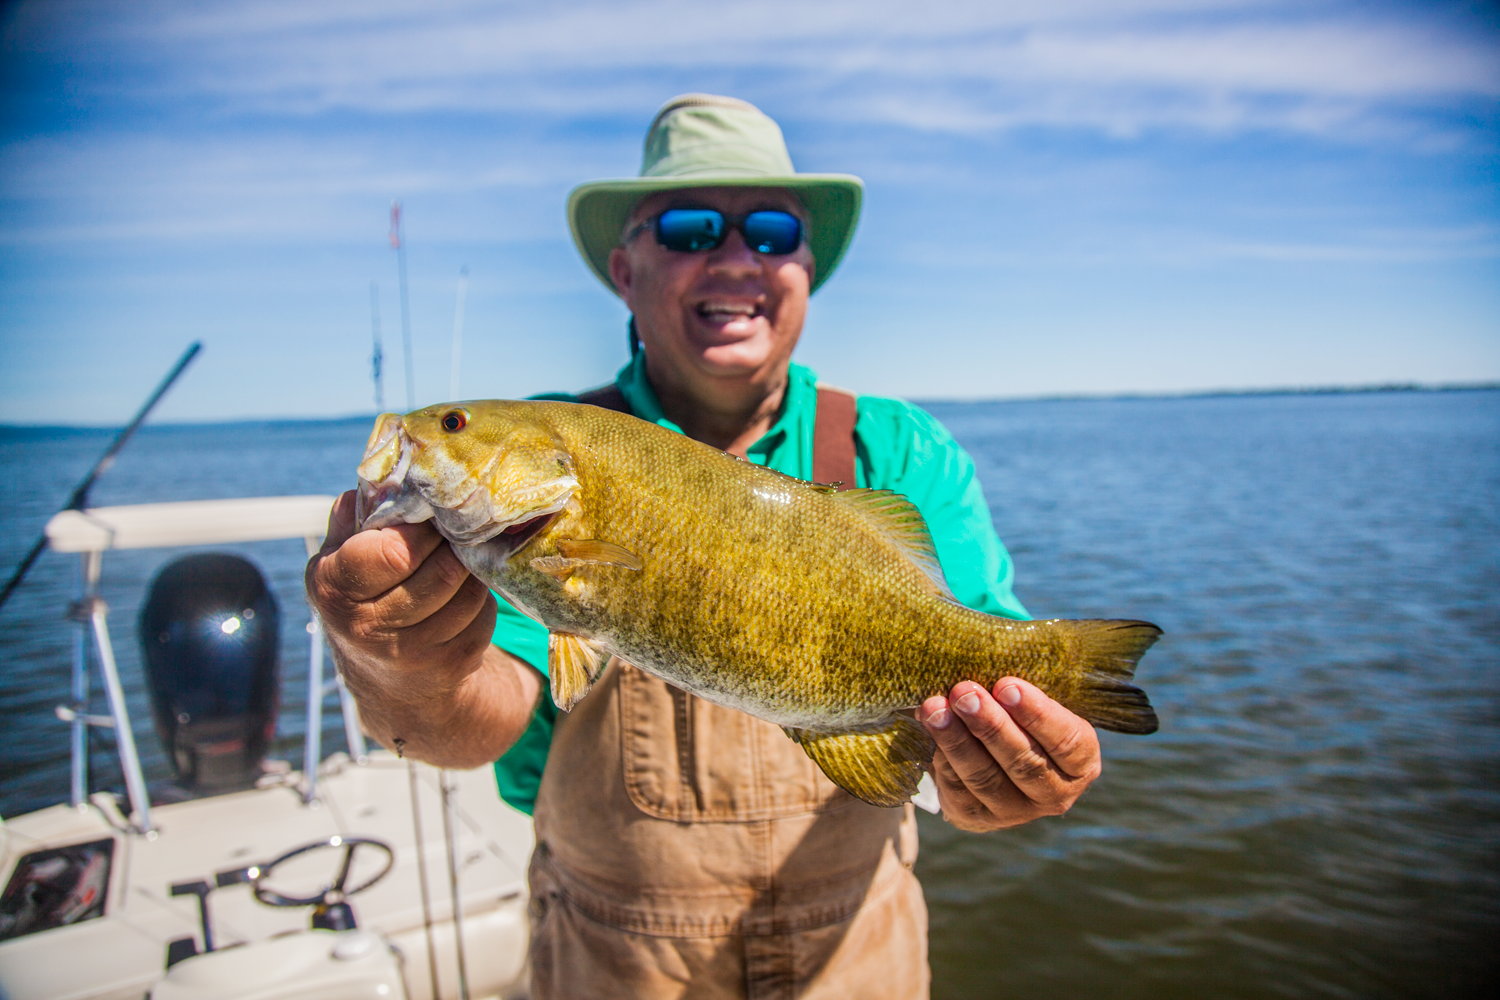 A smiling gent named Benny from Arkansas poses with a nice Chequamegon Bay smallie. According to Anglers All fishing guide Luke Kavajecz, who took Benny out on the lake, “We had to keep moving around this day to find the fish, but the action was steady and the weather was great.” (Photo courtesy of Luke Kavajecz)